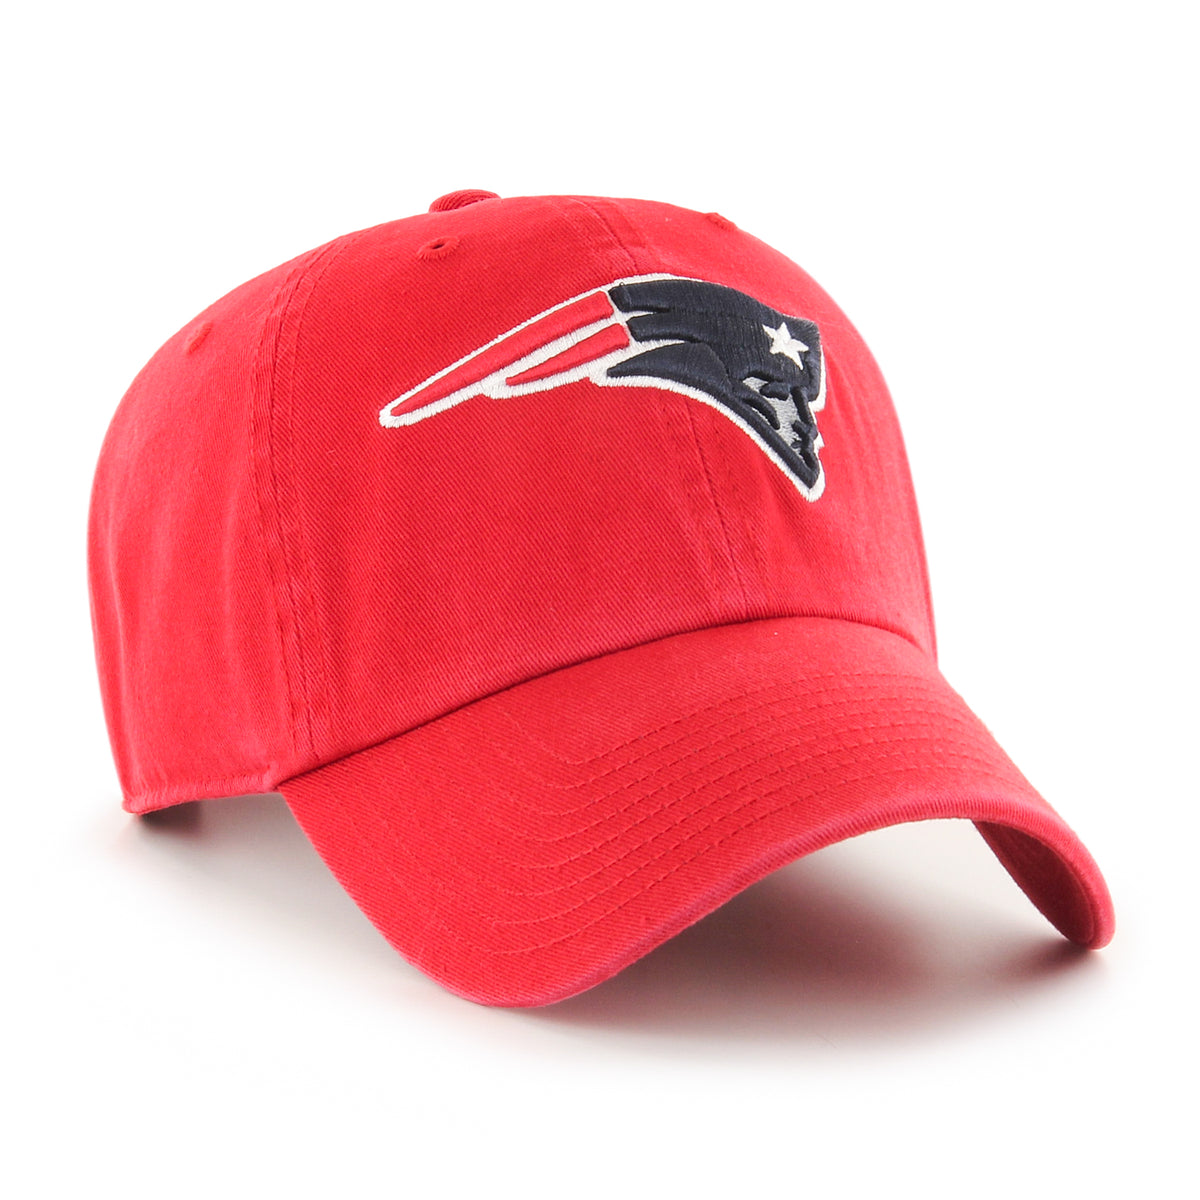 NEW ENGLAND PATRIOTS '47 CLEAN UP